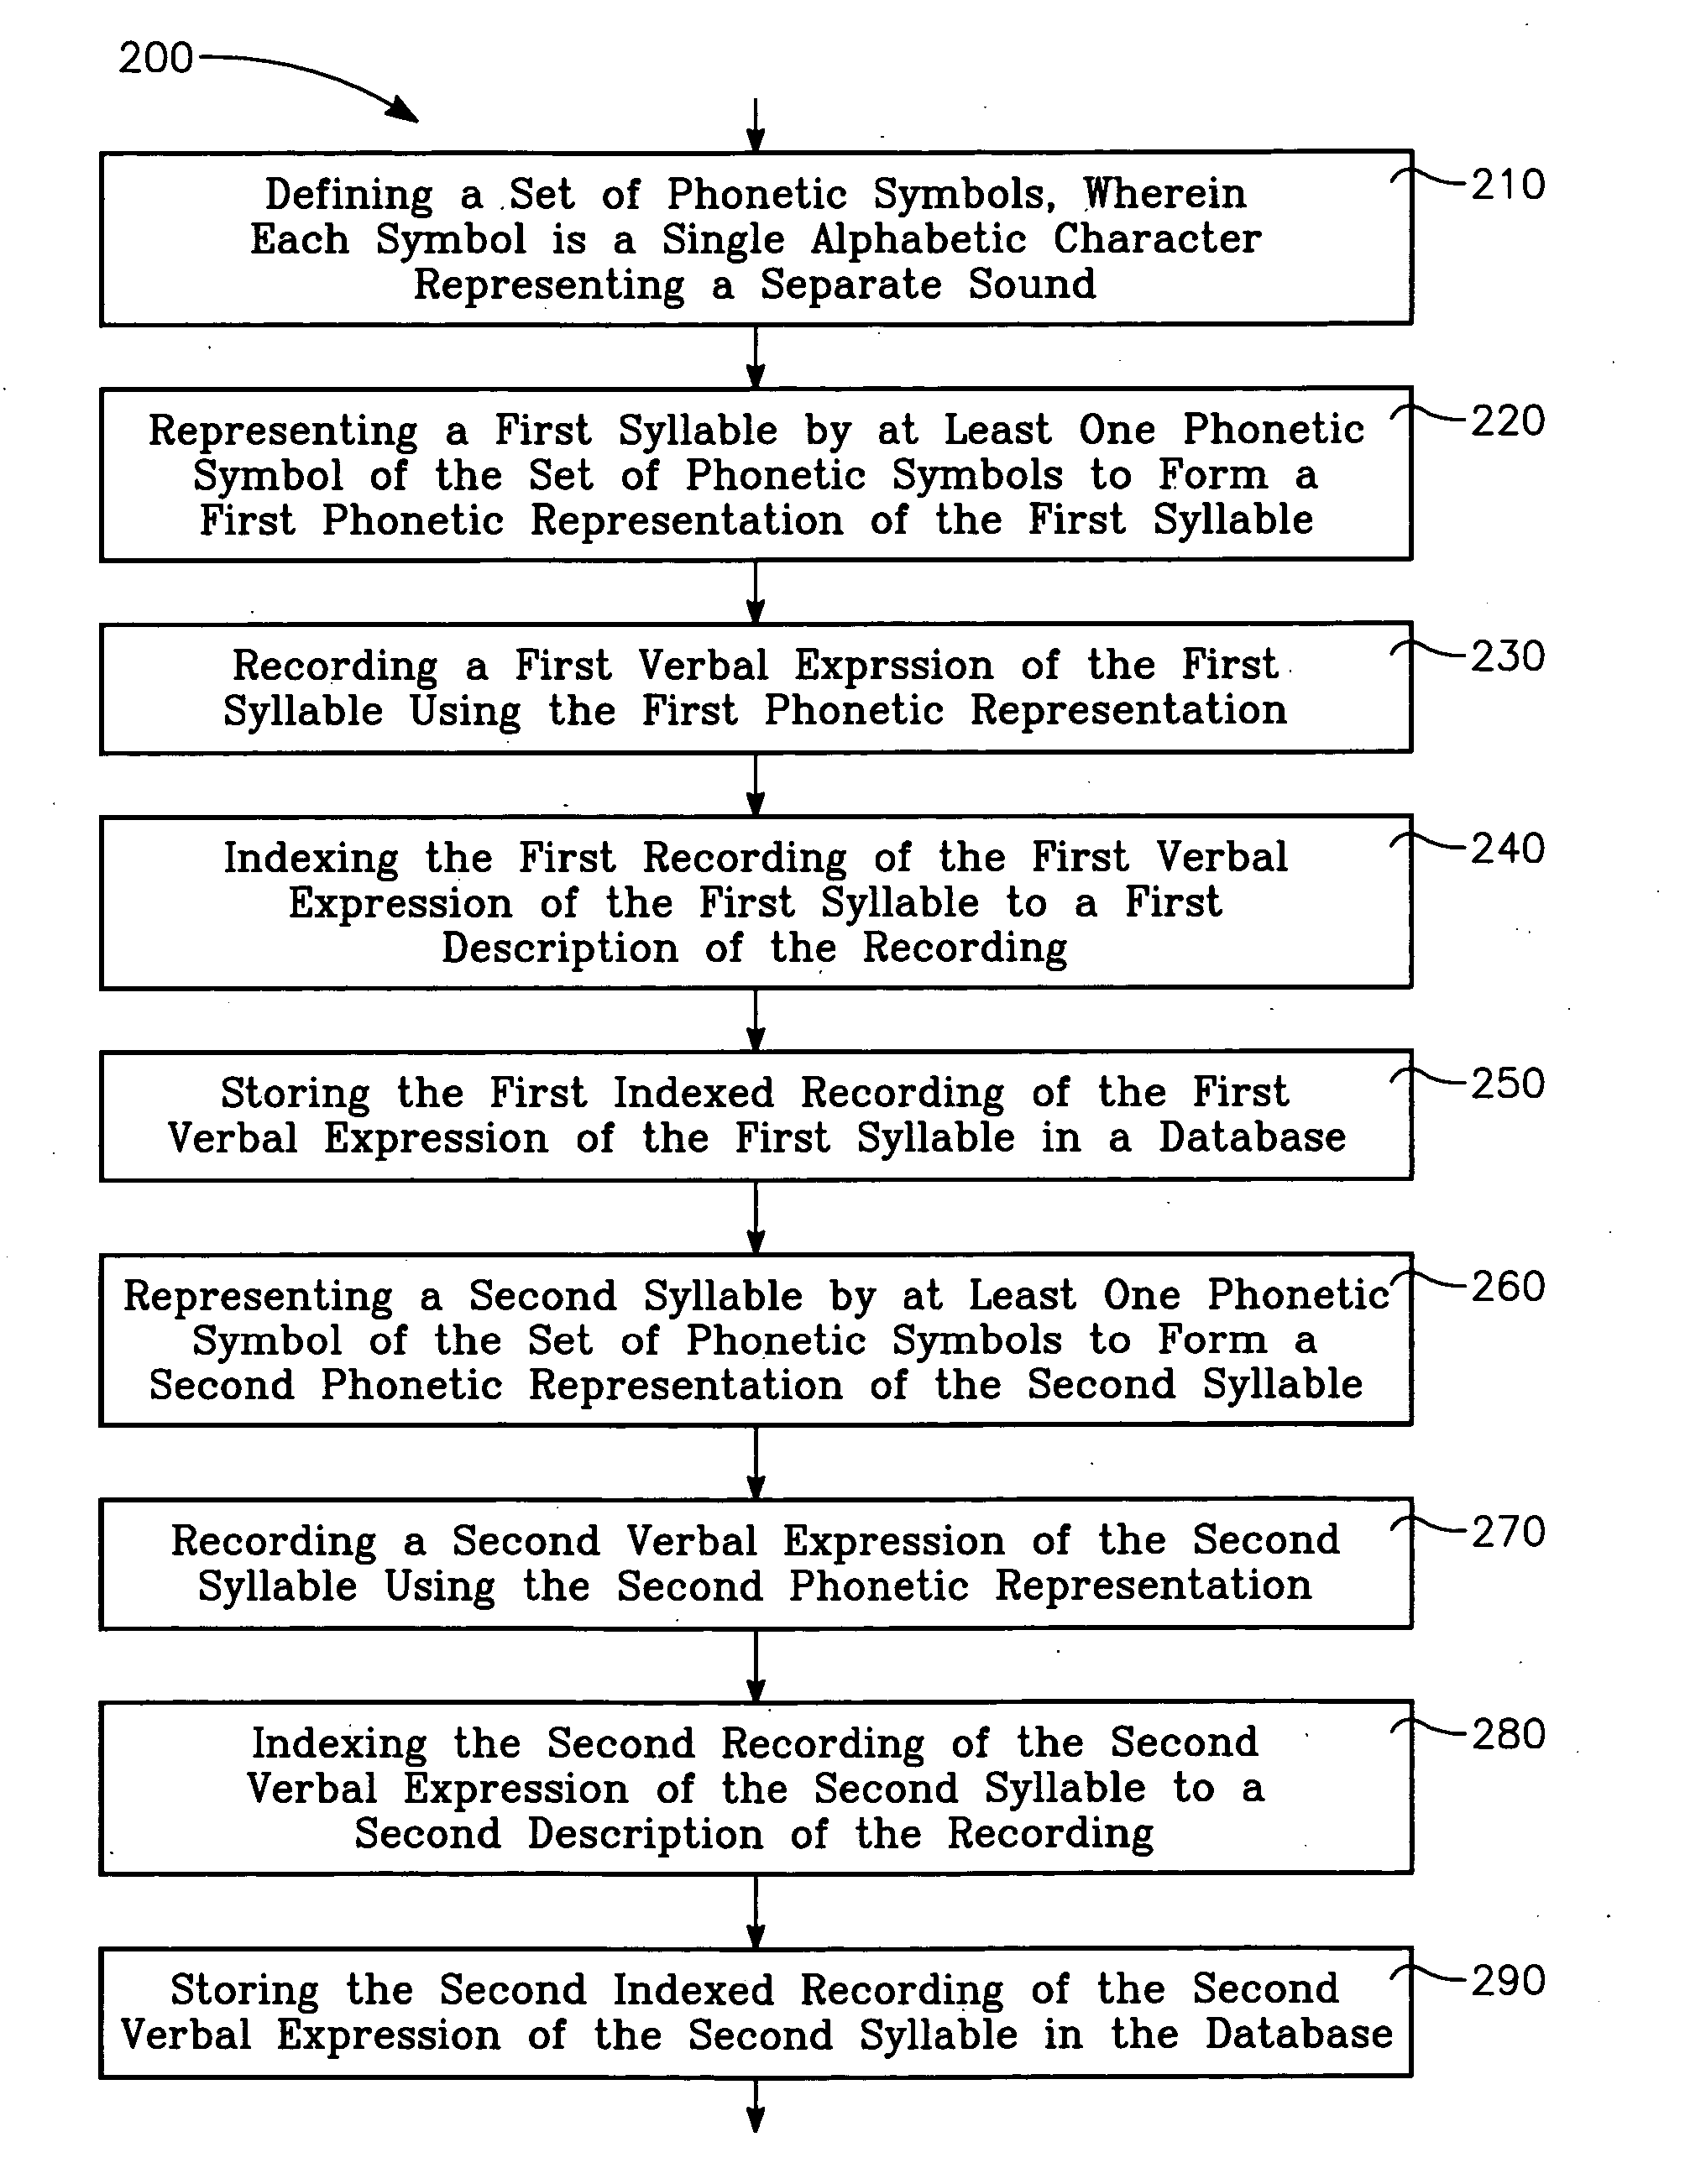 Database storing syllables and sound units for use in text to speech synthesis system